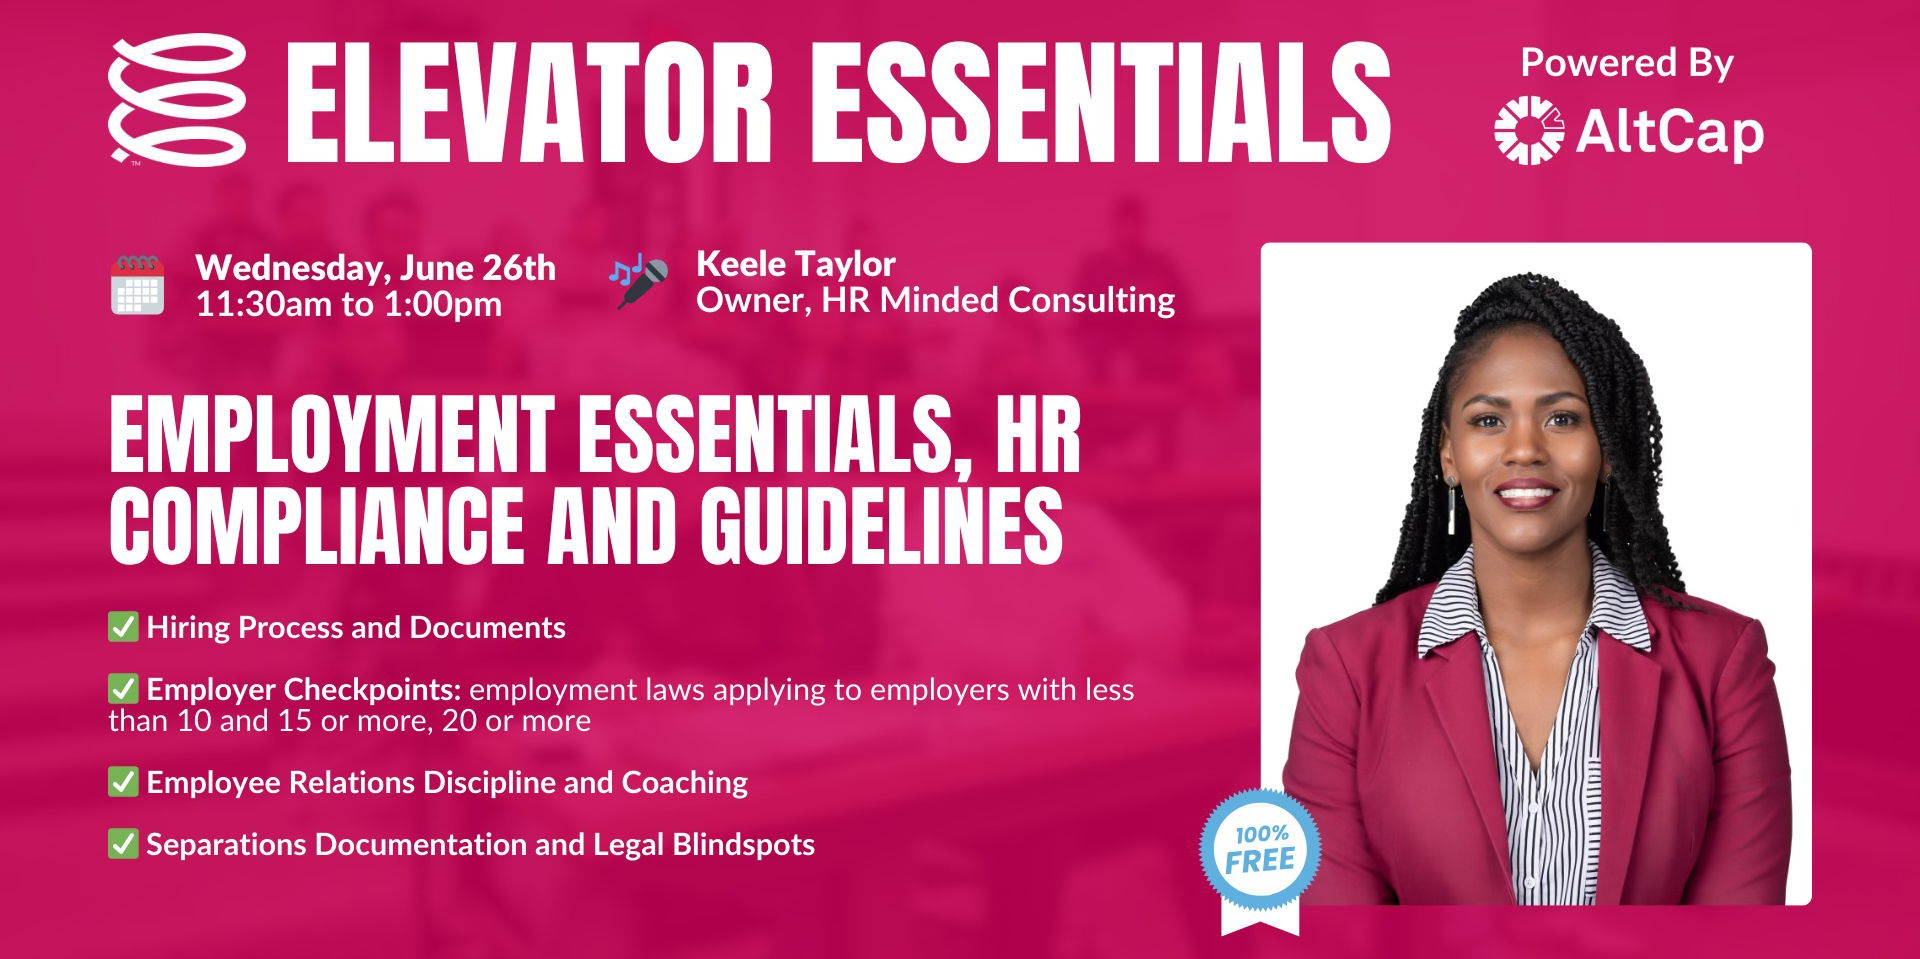 Elevator Essentials | Employment Essentials, HR Compliance and Guidelines promotional image